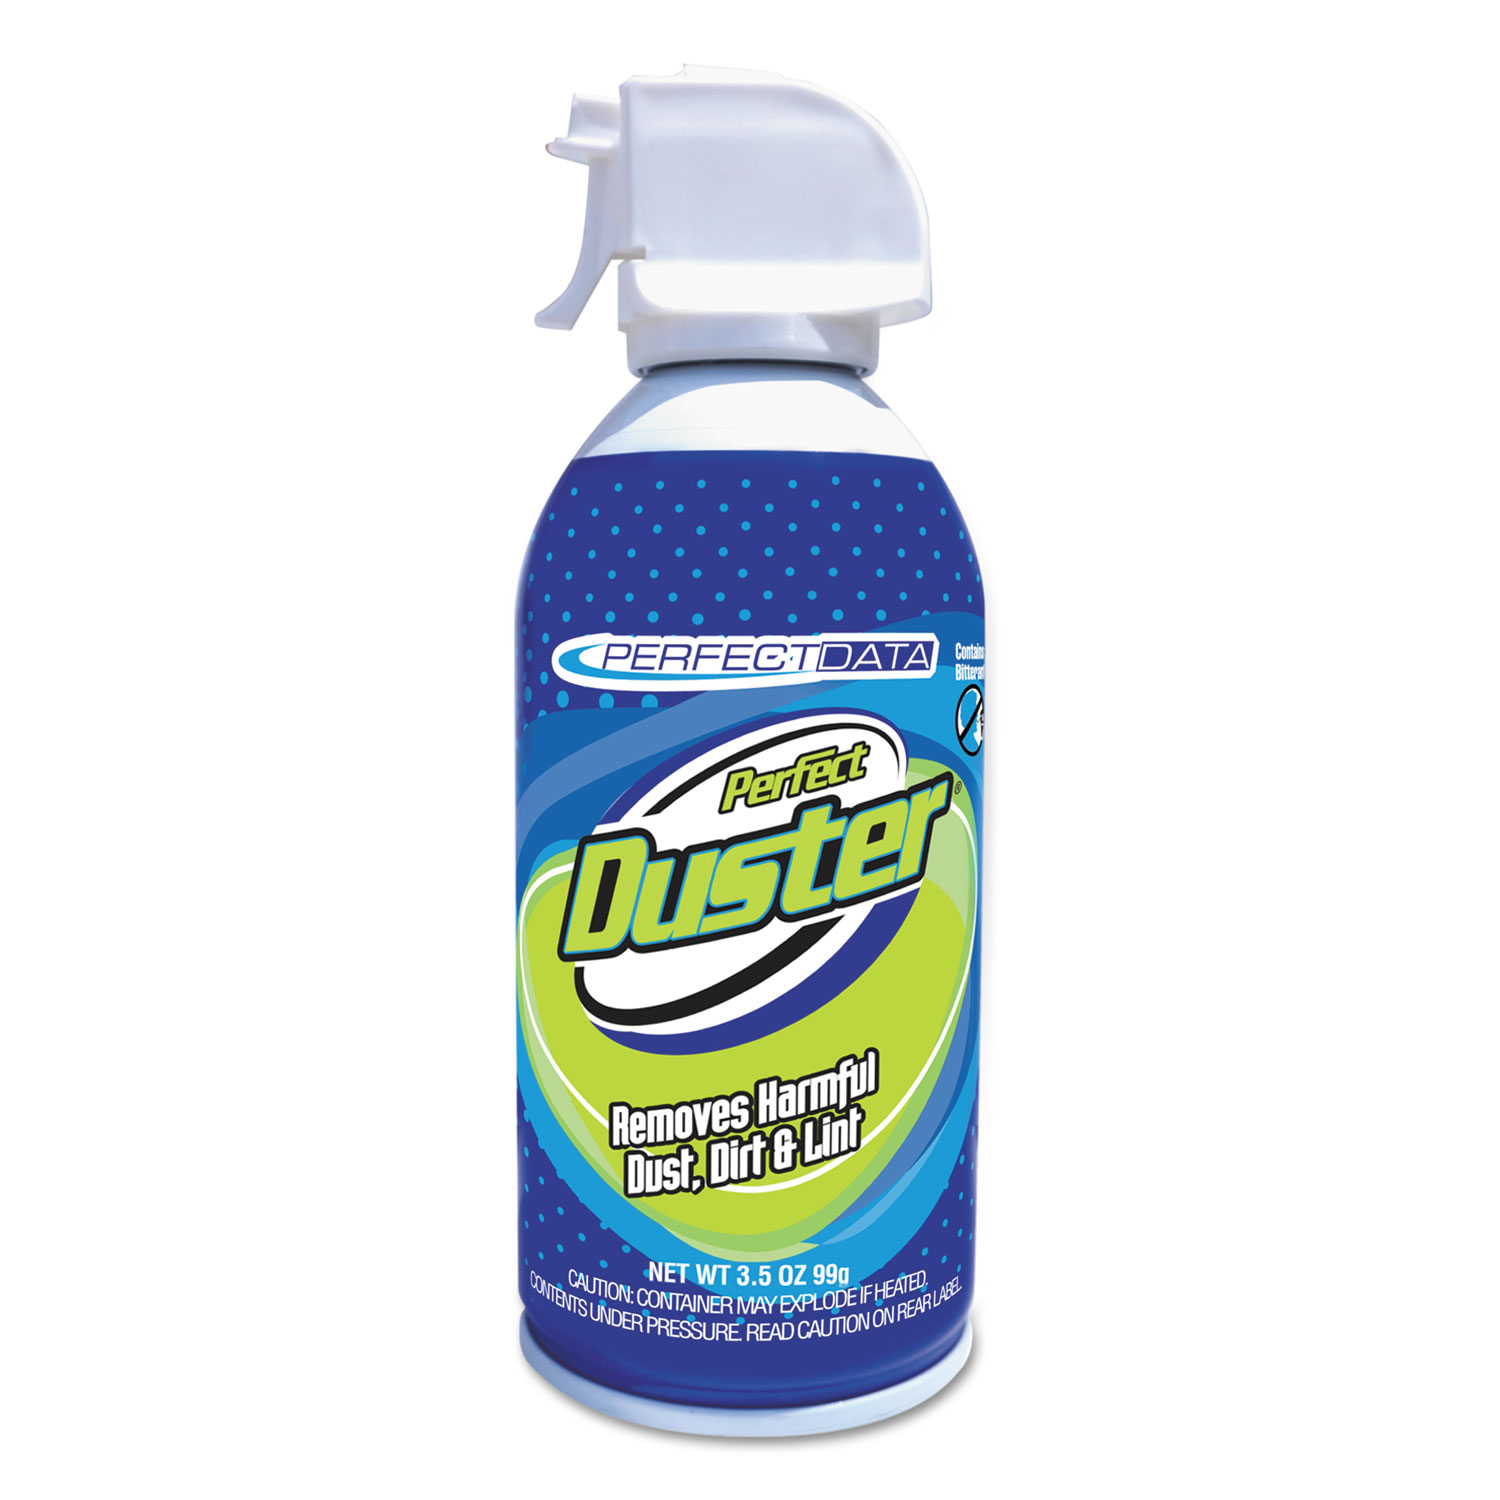  Perfect Duster 50501207 Power Duster, 3.5 oz Can (PDC50501207) 